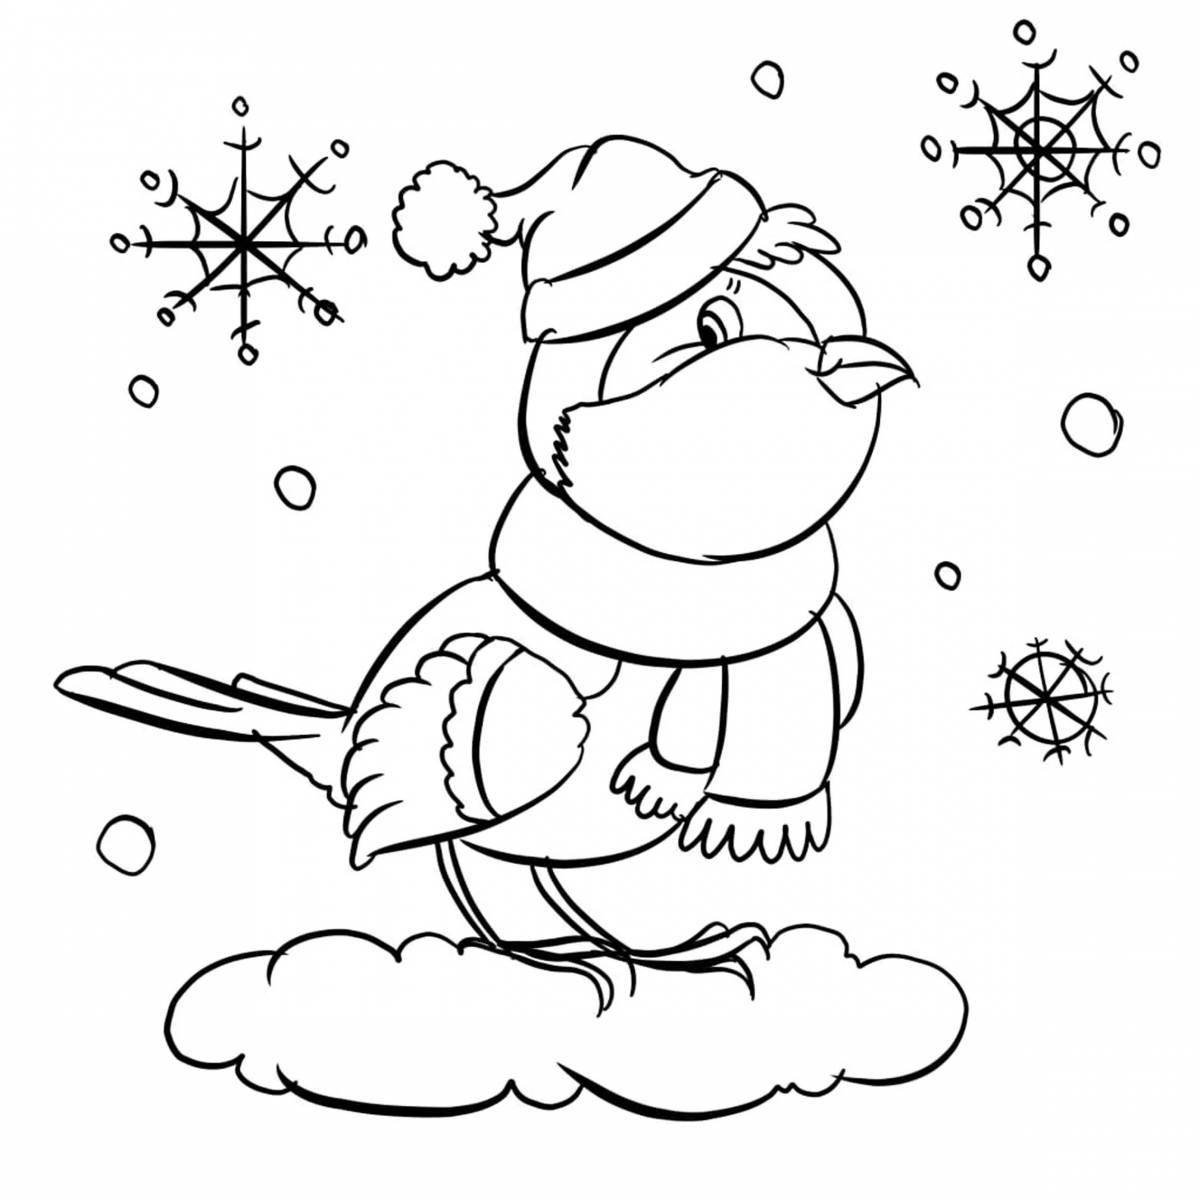 Festive winter birds coloring book for kids